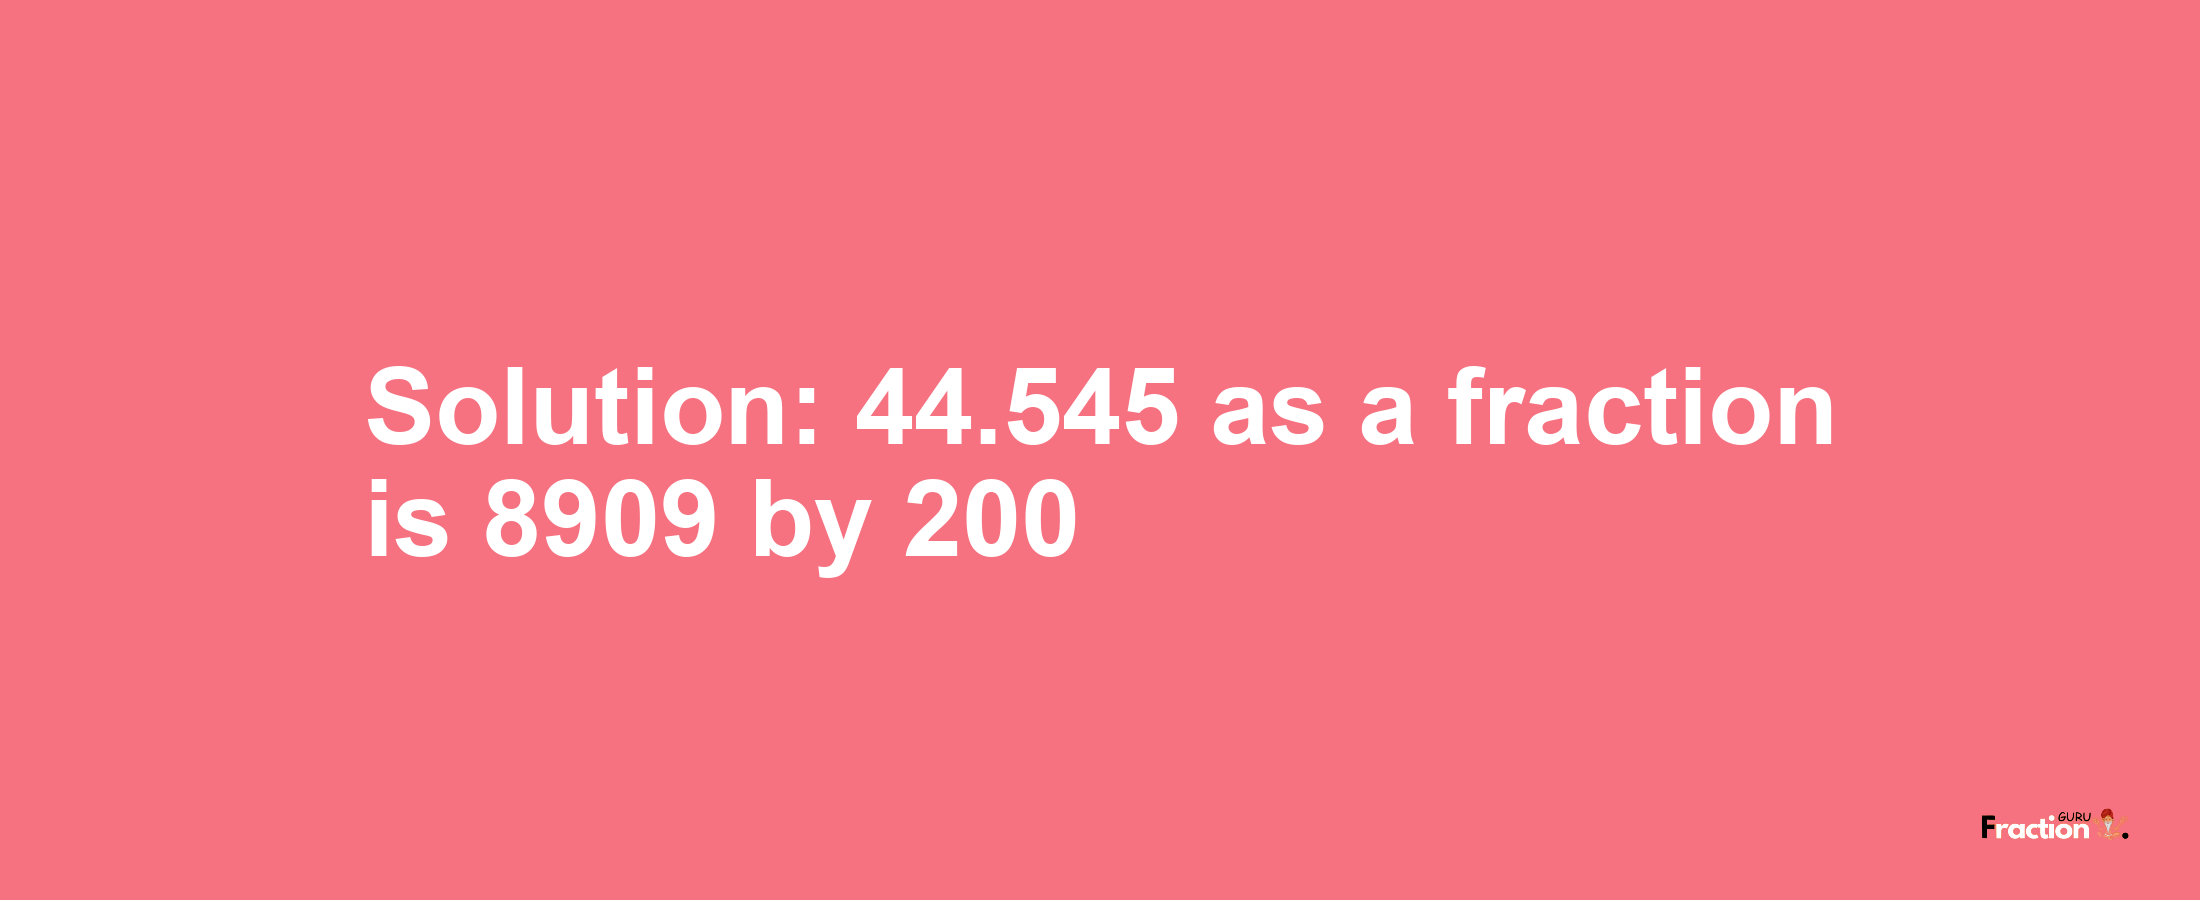 Solution:44.545 as a fraction is 8909/200